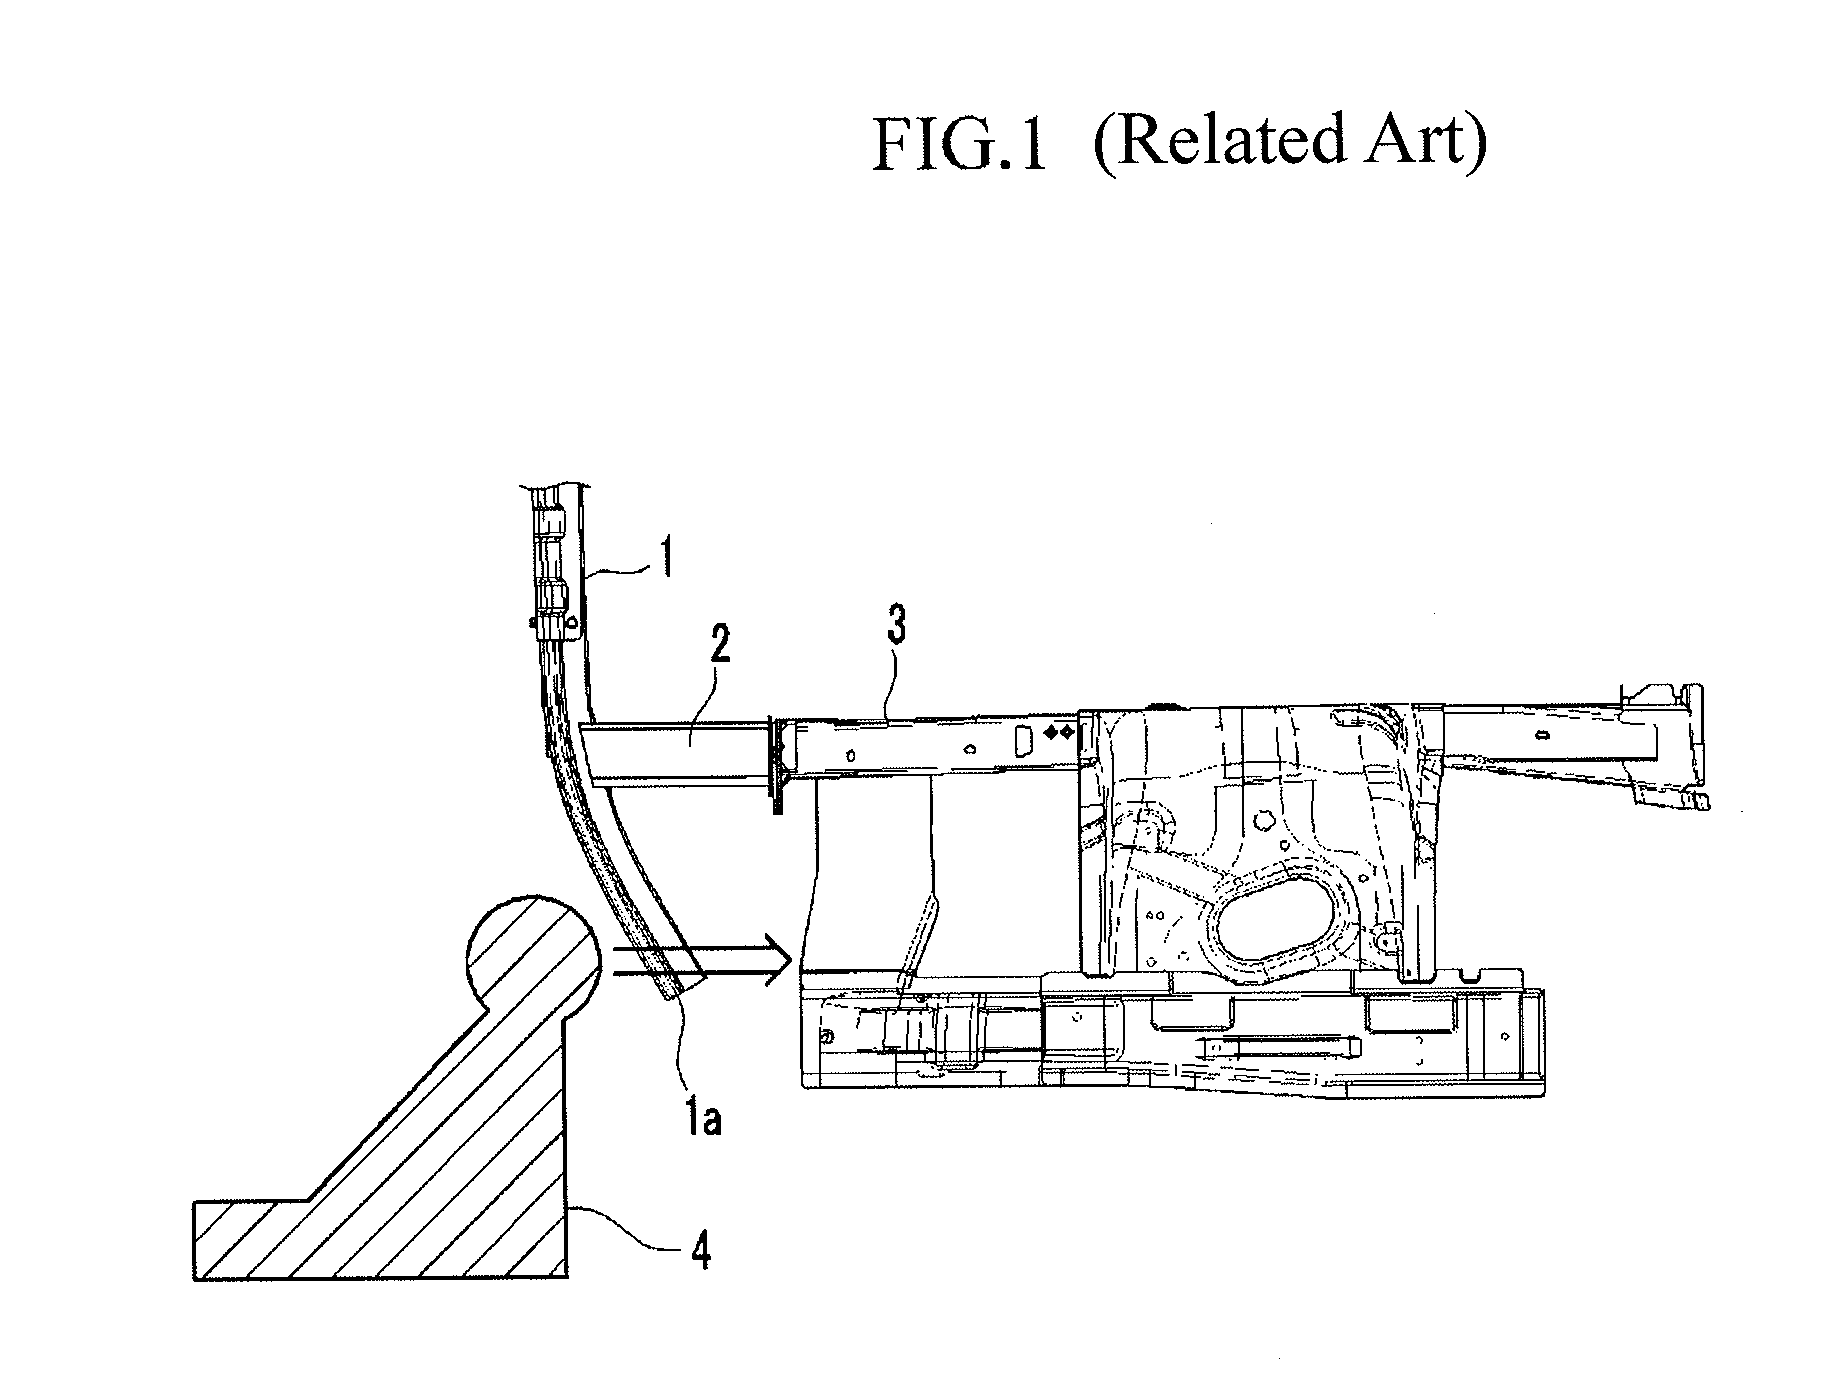 Impact absorbing device for vehicle